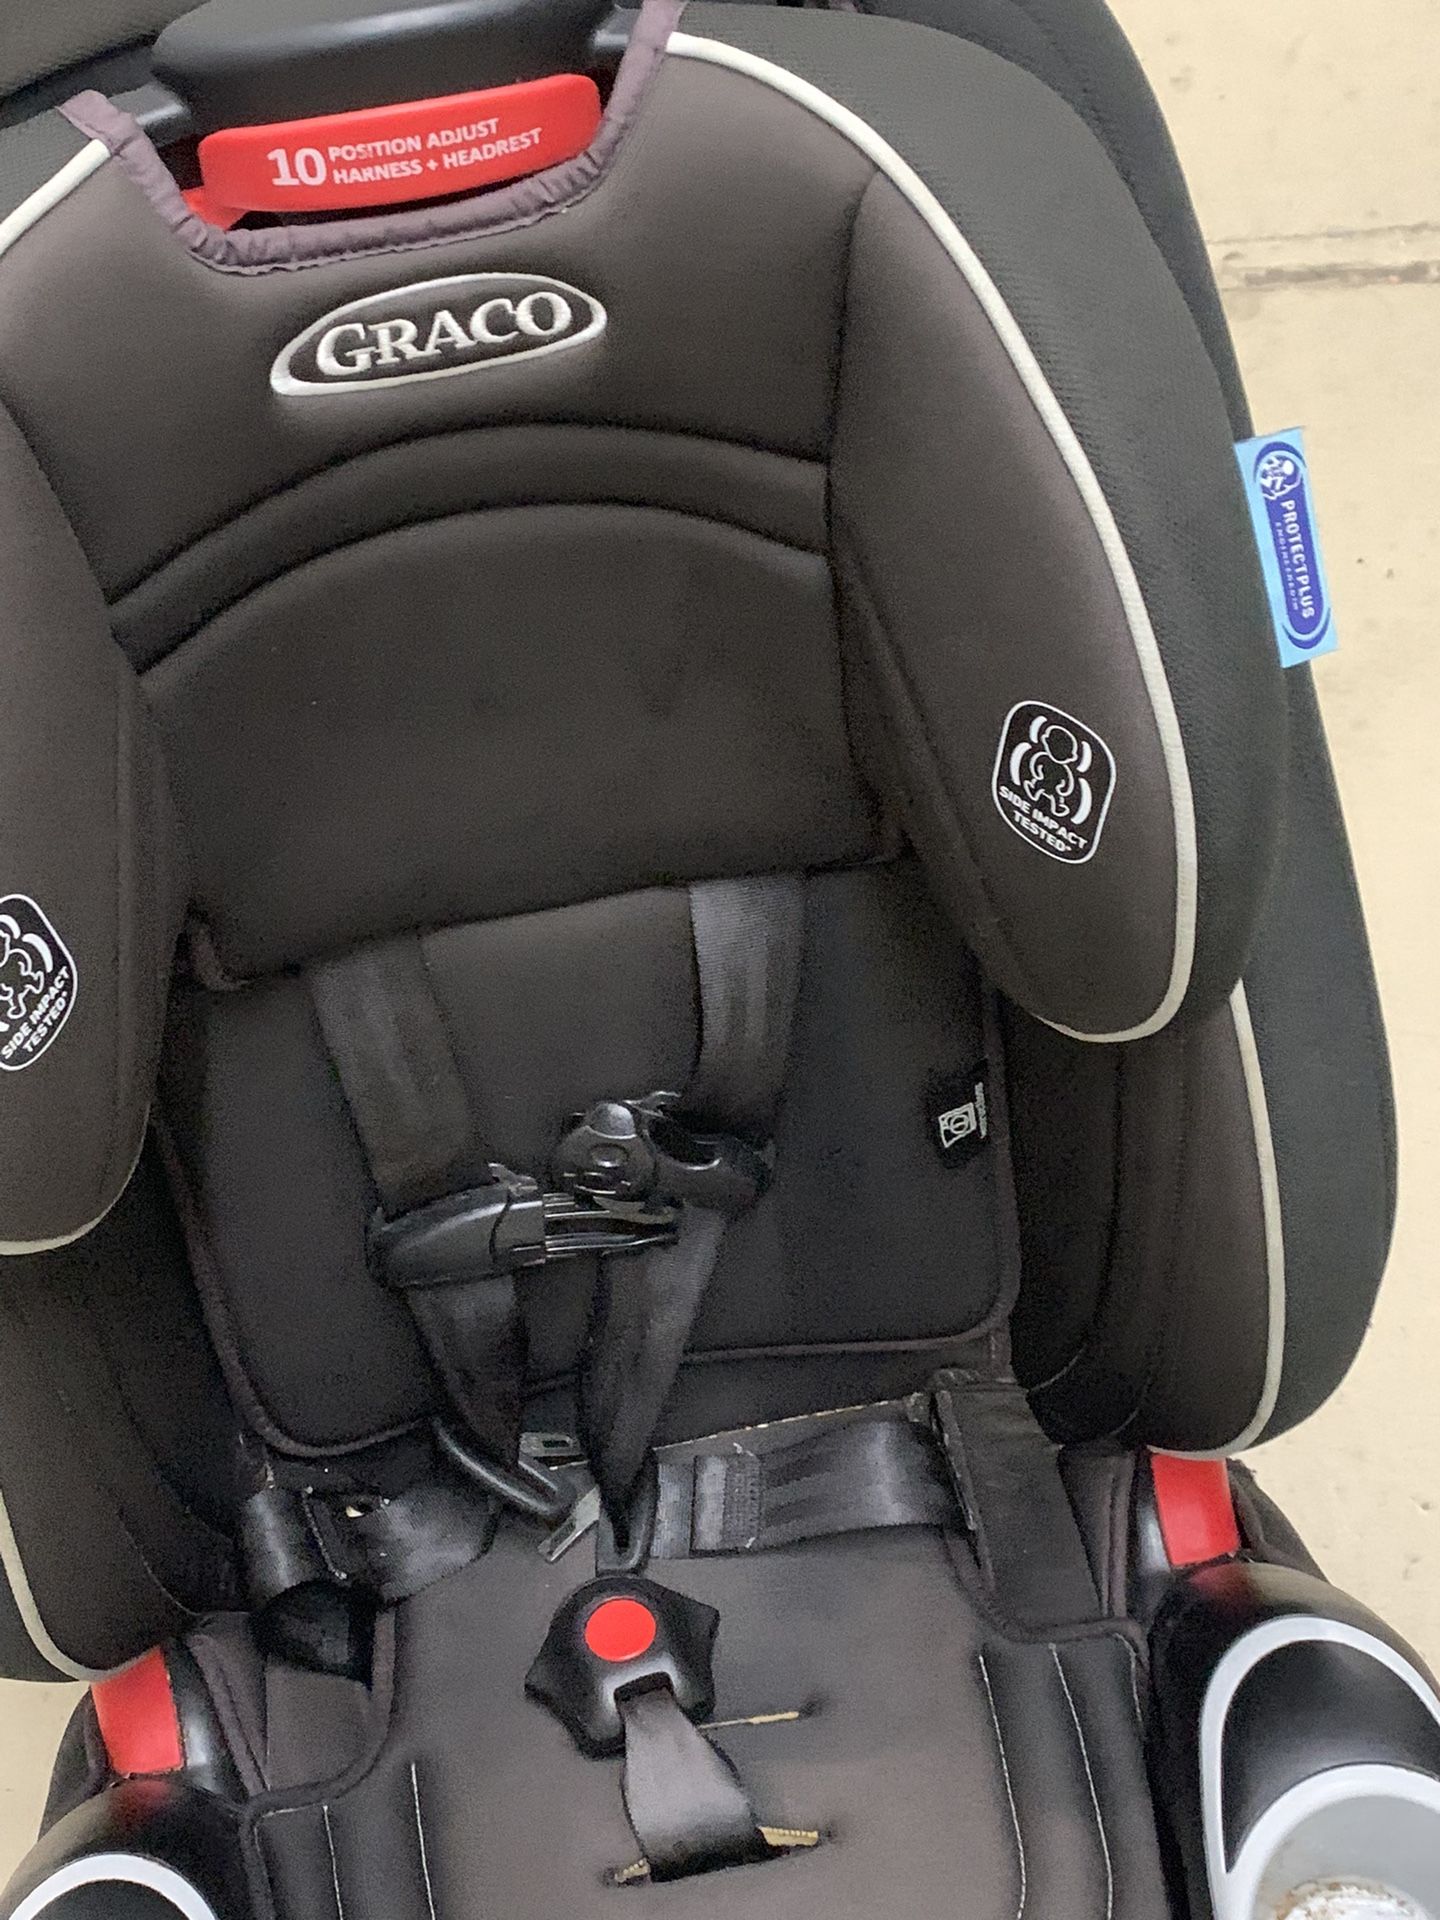 Graco Deluxe Car Seat!